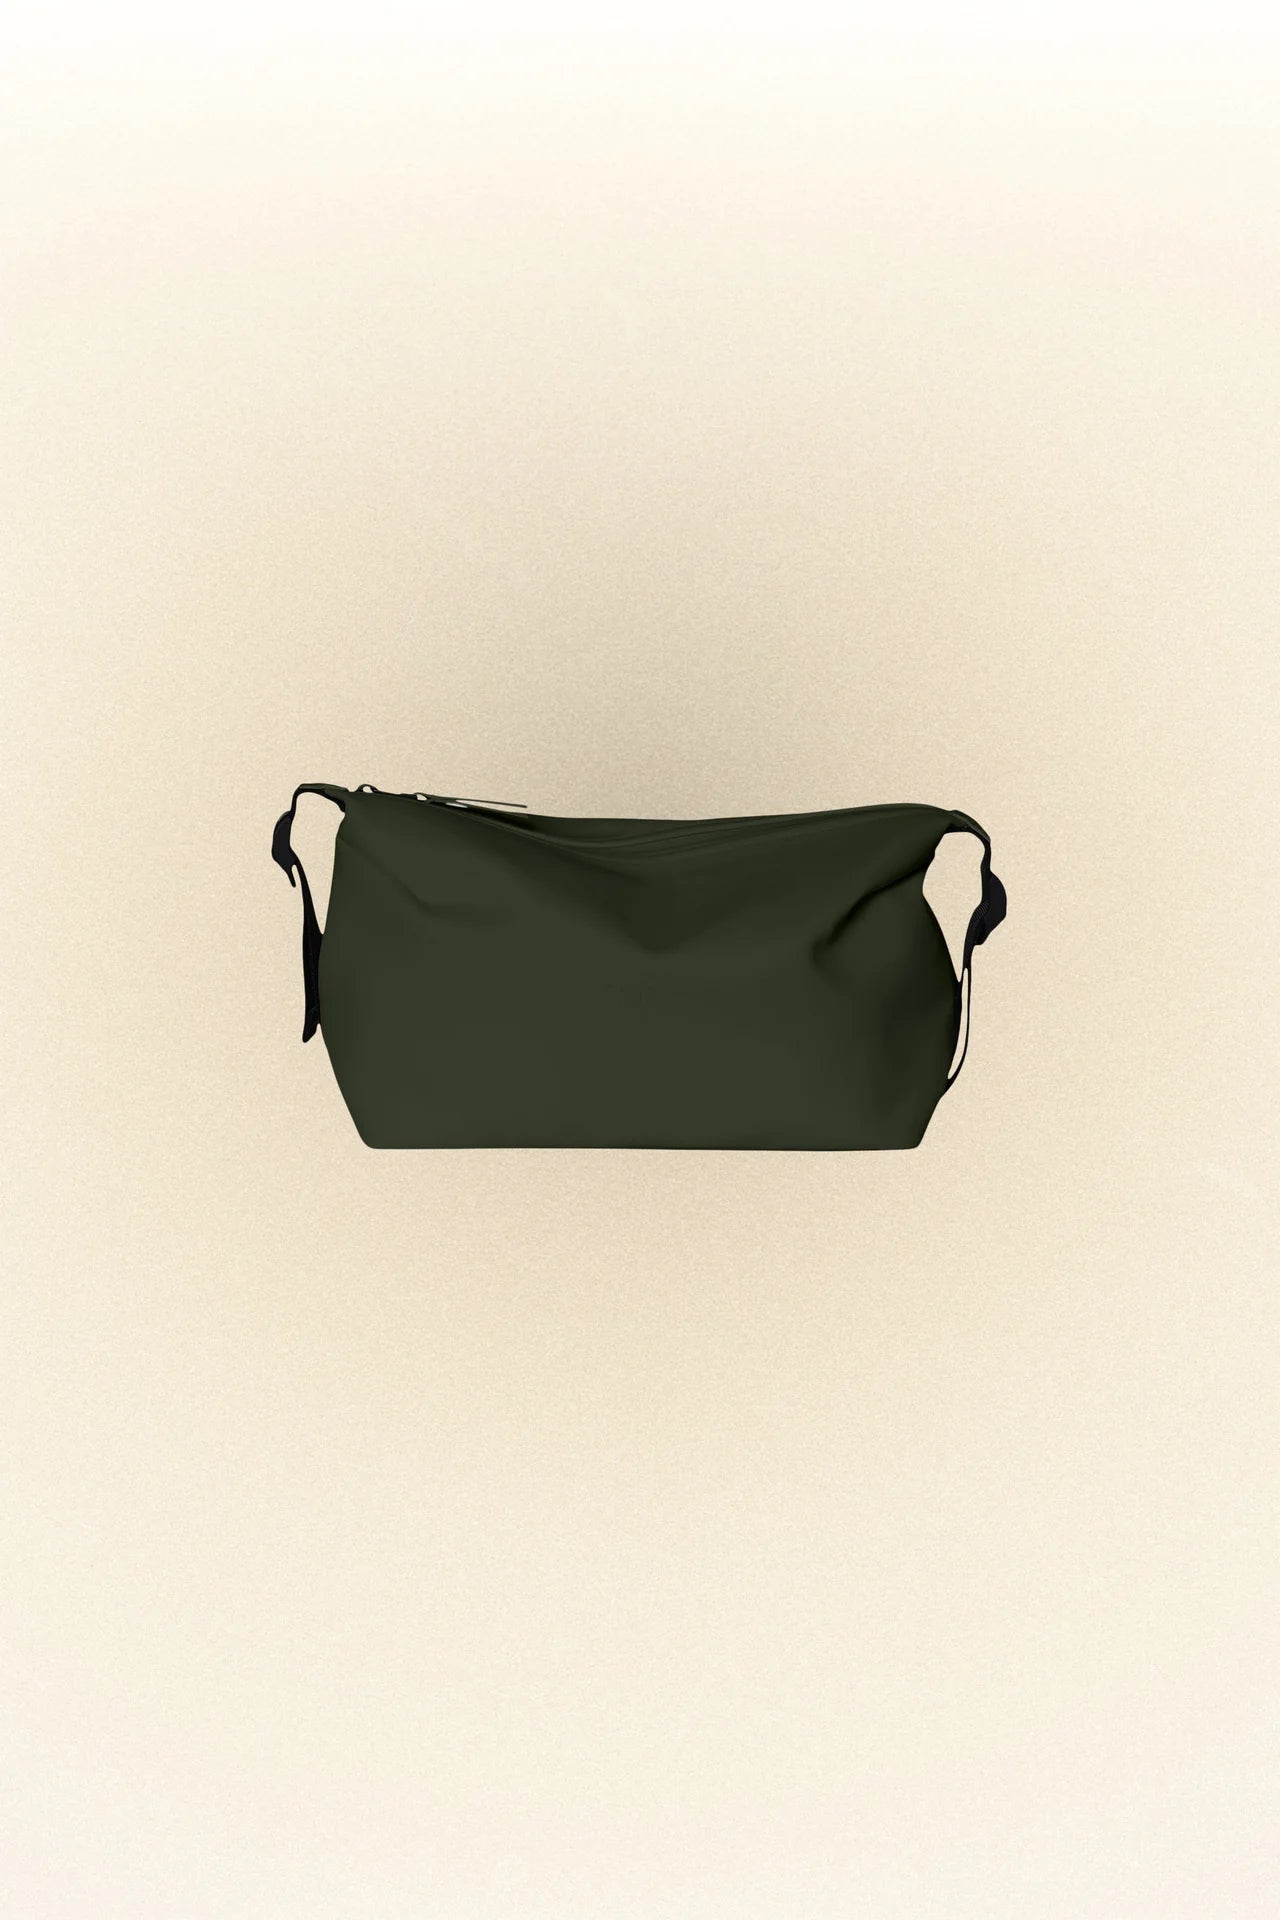 The Rains Hilo Wash Bag, a small black bag with a waterproof design, stands out against a clean white background.